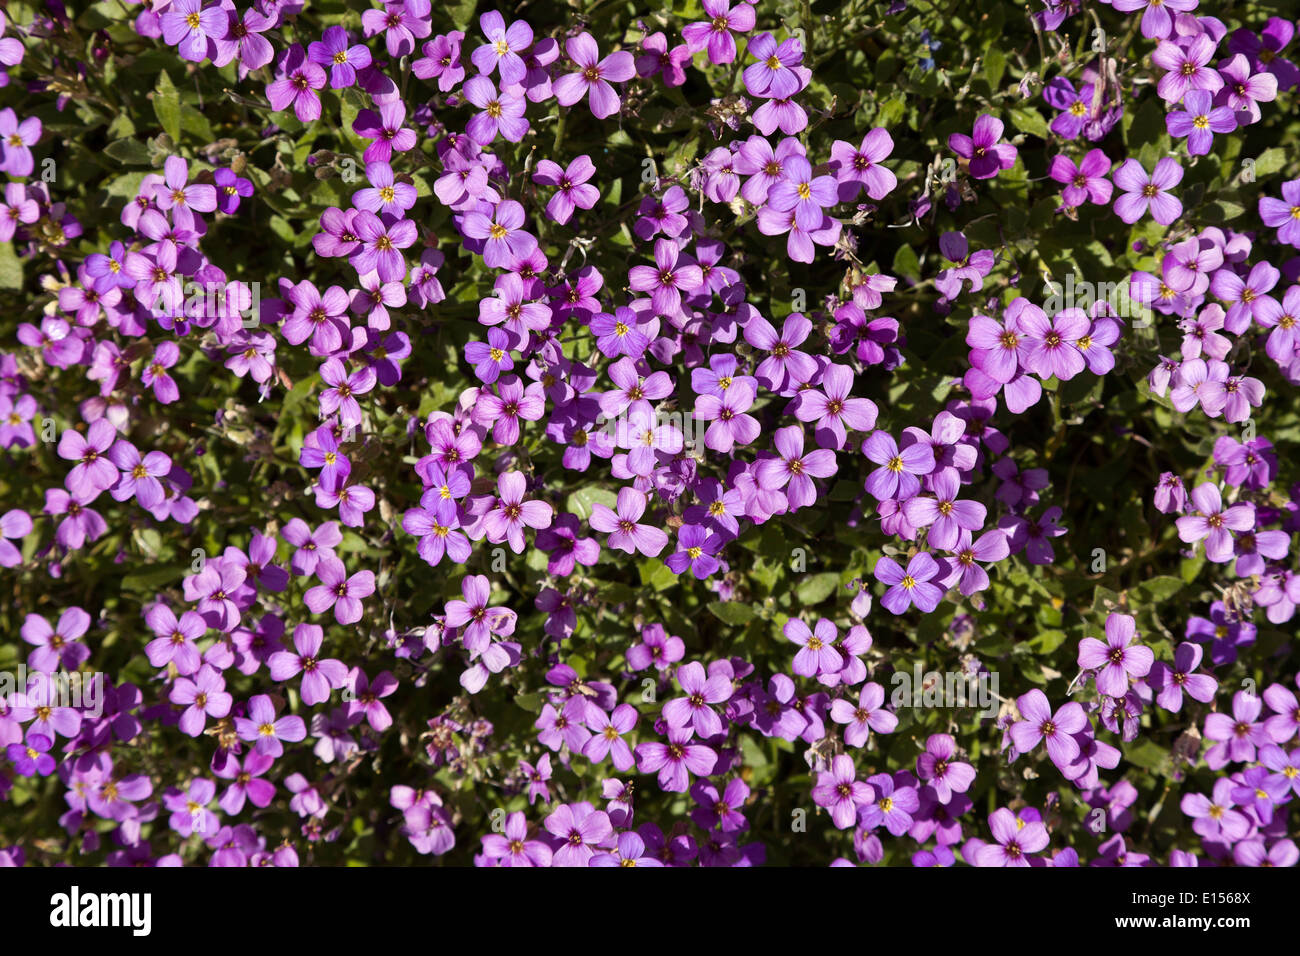 Aubrieta commonly known as Aubretia flowers in bloom Stock Photo